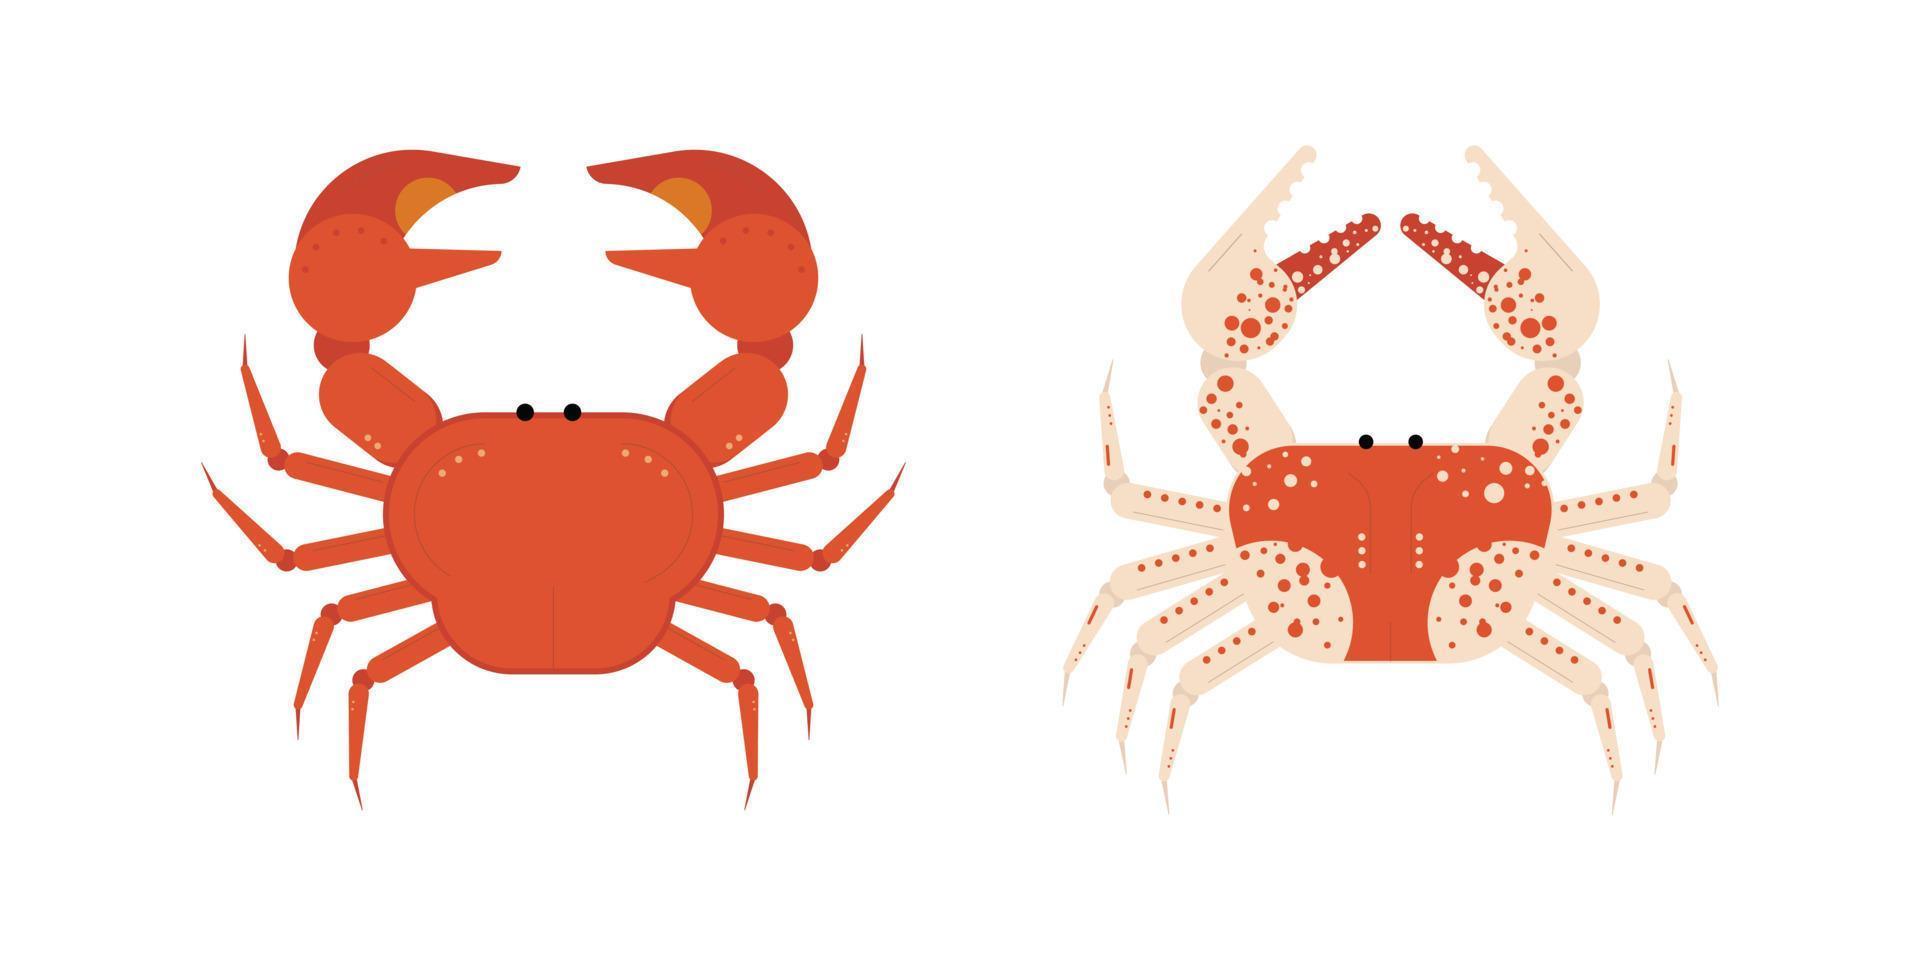 Crab vector. Colorful crab vector. Aquatic animal in flat design vector. Flat style vector illustration isolated on white background.